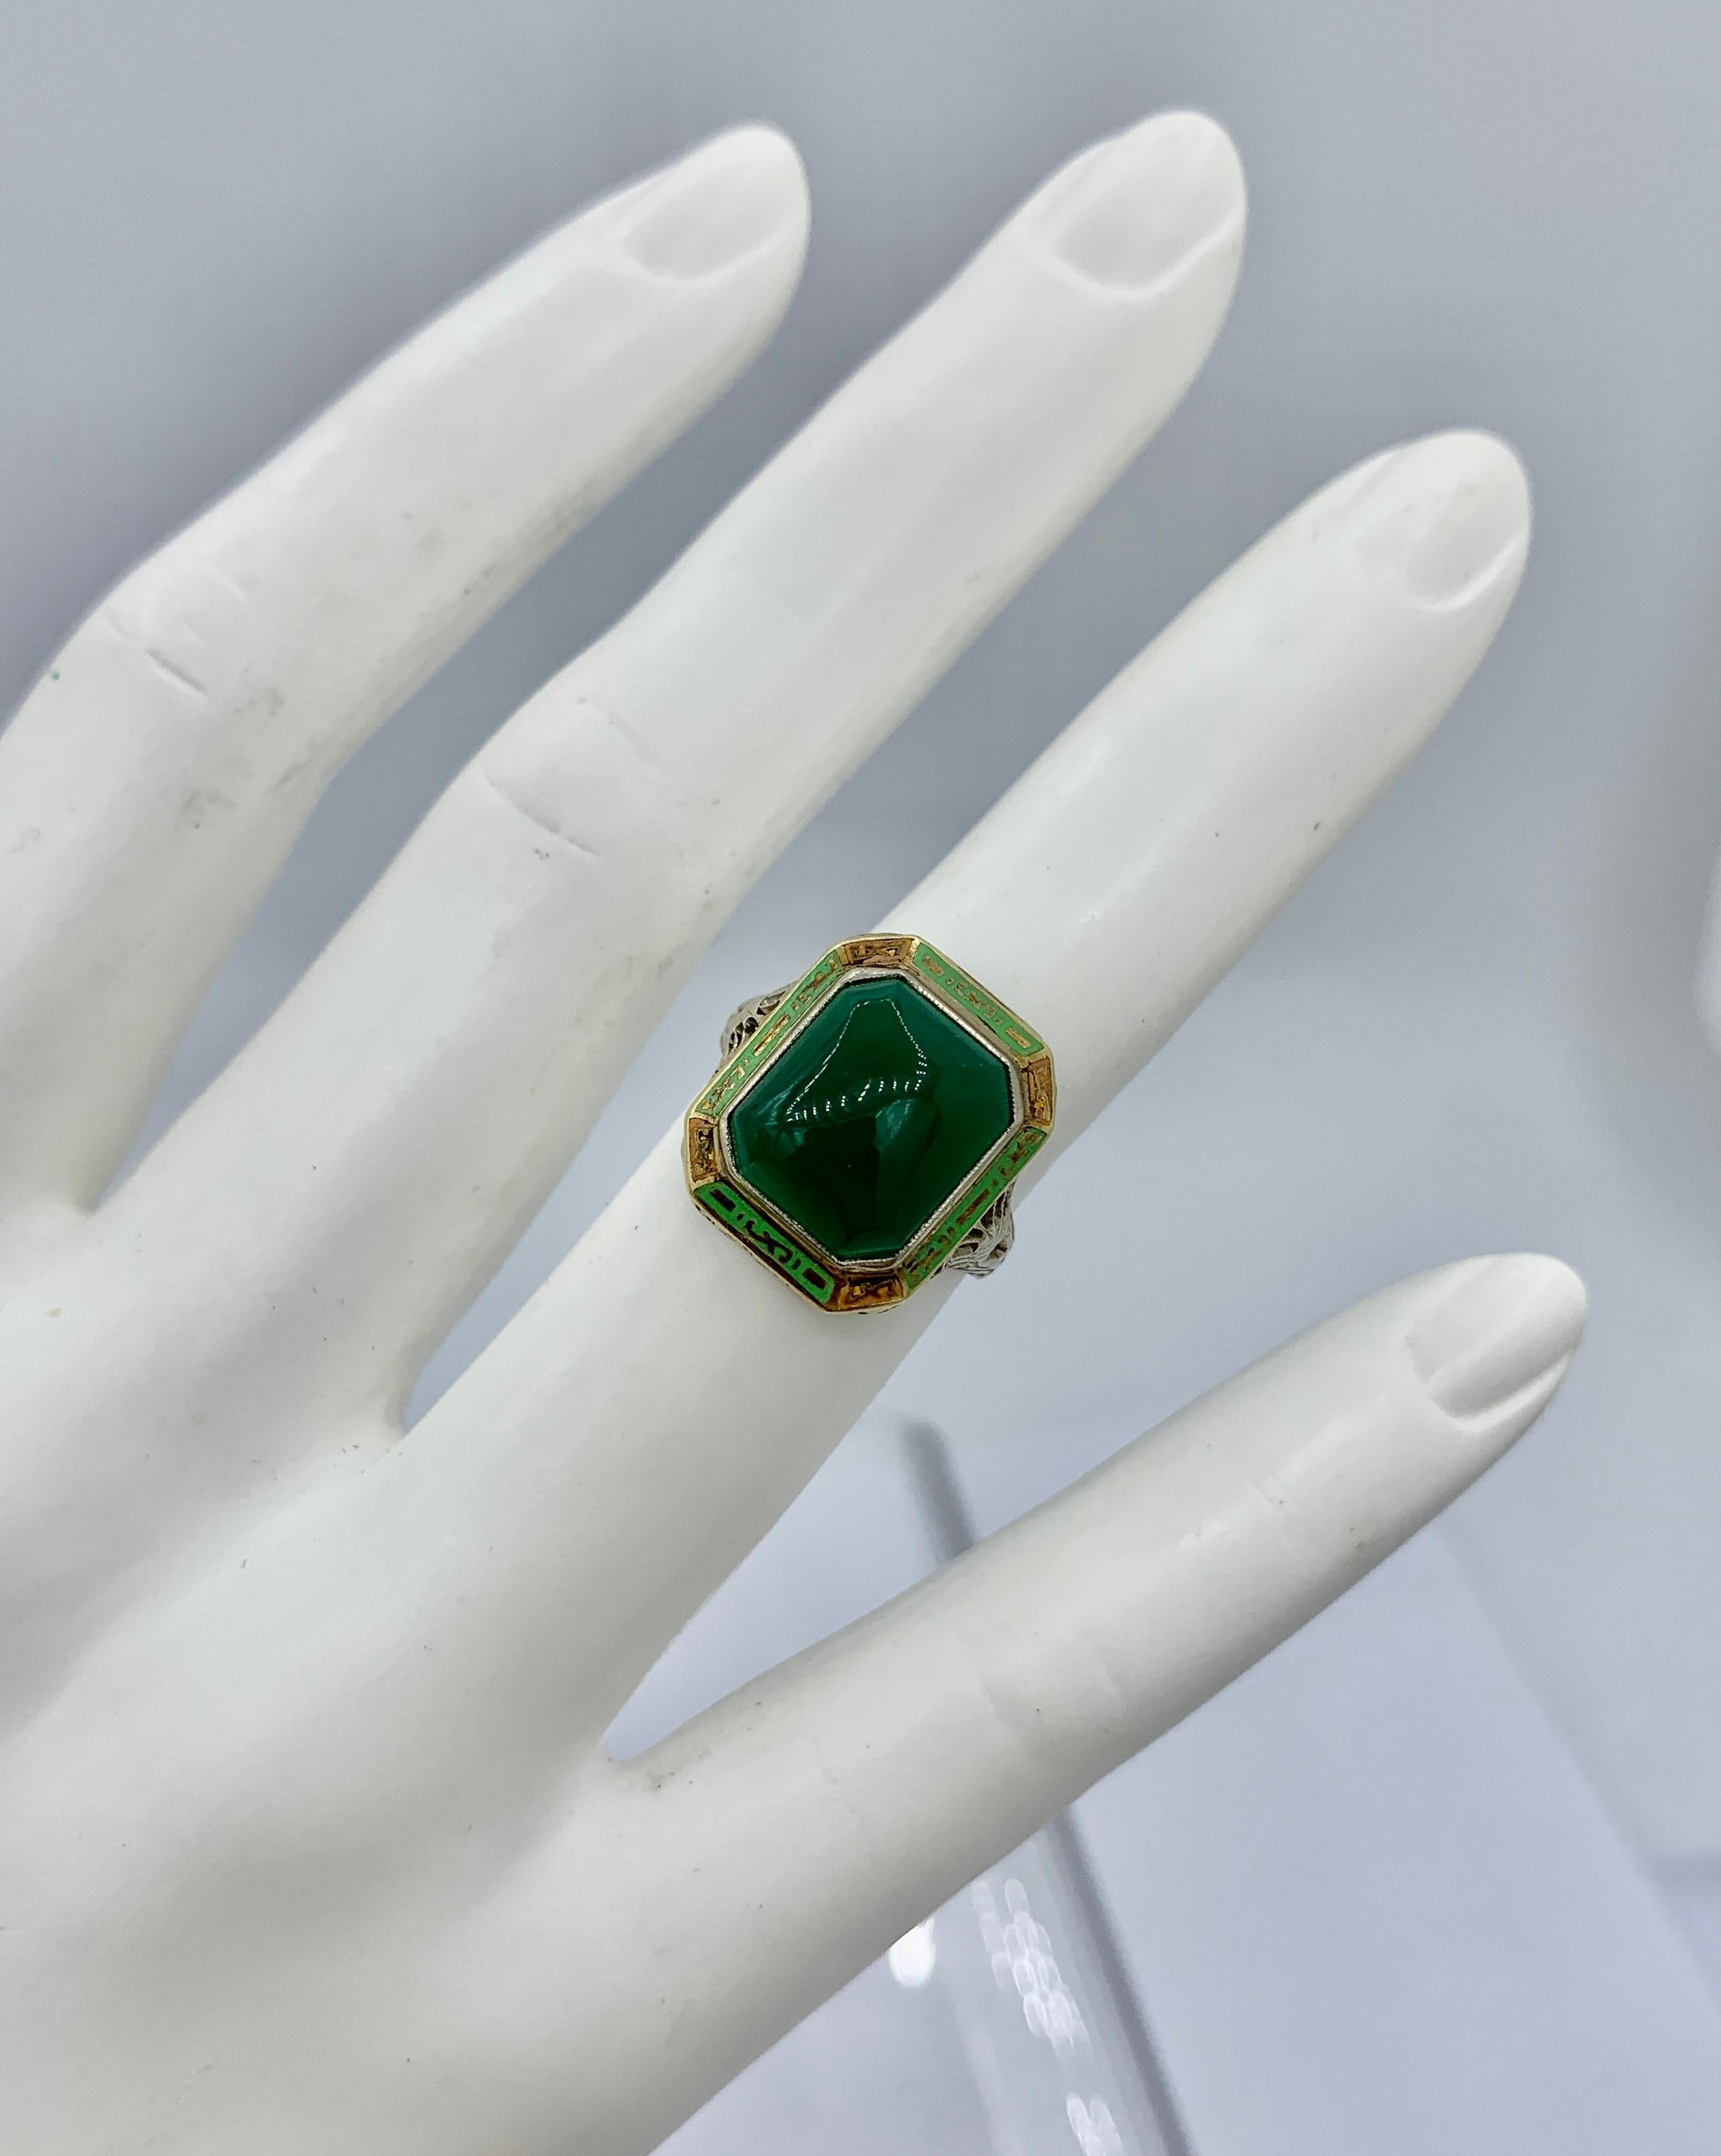 This is an extraordinary antique Art Deco Enamel Ring with a stunning rectangular Green Onyx in the center with gorgeous green and orange enamel decoration surrounding the Green Onyx.  The green onyx is a stunning gem with beautiful color and a